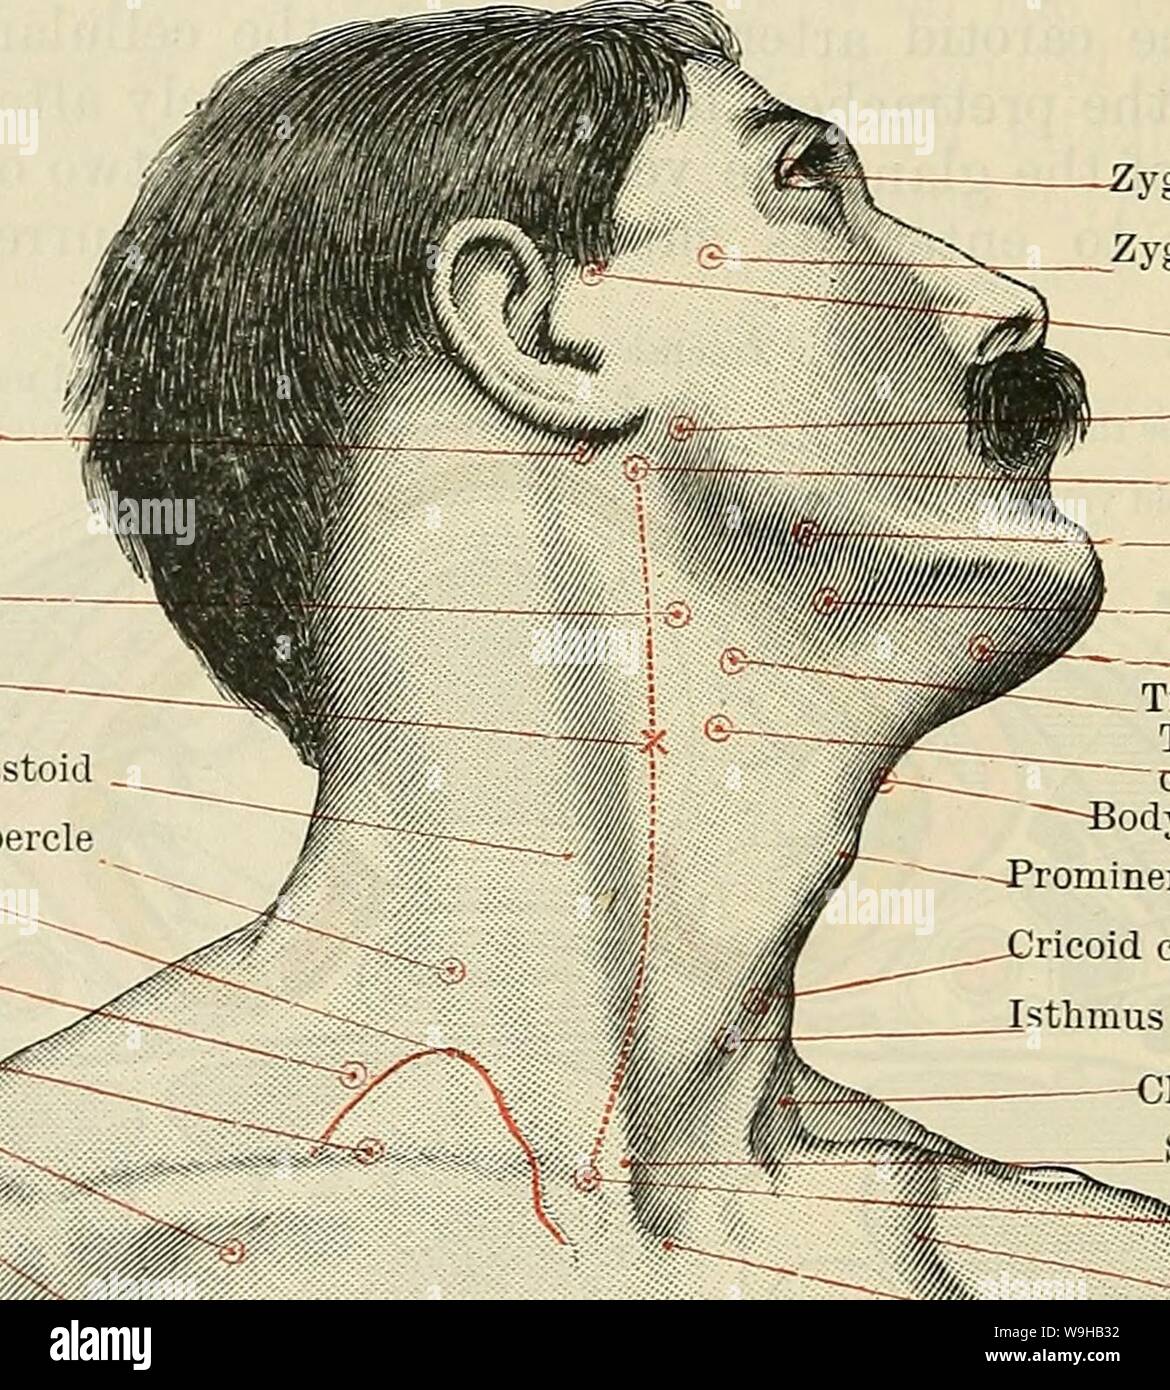 Archive image from page 1423 of Cunningham's Text-book of anatomy (1914). Cunningham's Text-book of anatomy  cunninghamstextb00cunn Year: 1914 ( ygomatie process of frontal Zygoma Temporal artery Facial nerve Transverse process of atlas External maxillary artery Submaxillary gland ——-Anterior belly of digastric — Tip of greater cornu of hyoid bone Tip of superior cornu of thyreoid cartilage Body of hyoid bone -Prominentia laryngea ricoid cartilage  Isthmus of thyreoid gland -—Clavicular head of sterno-mastoid Sternal head of sterno-mastoid 232»b». Bifurcation of innominate artery -Infra-clavic Stock Photo